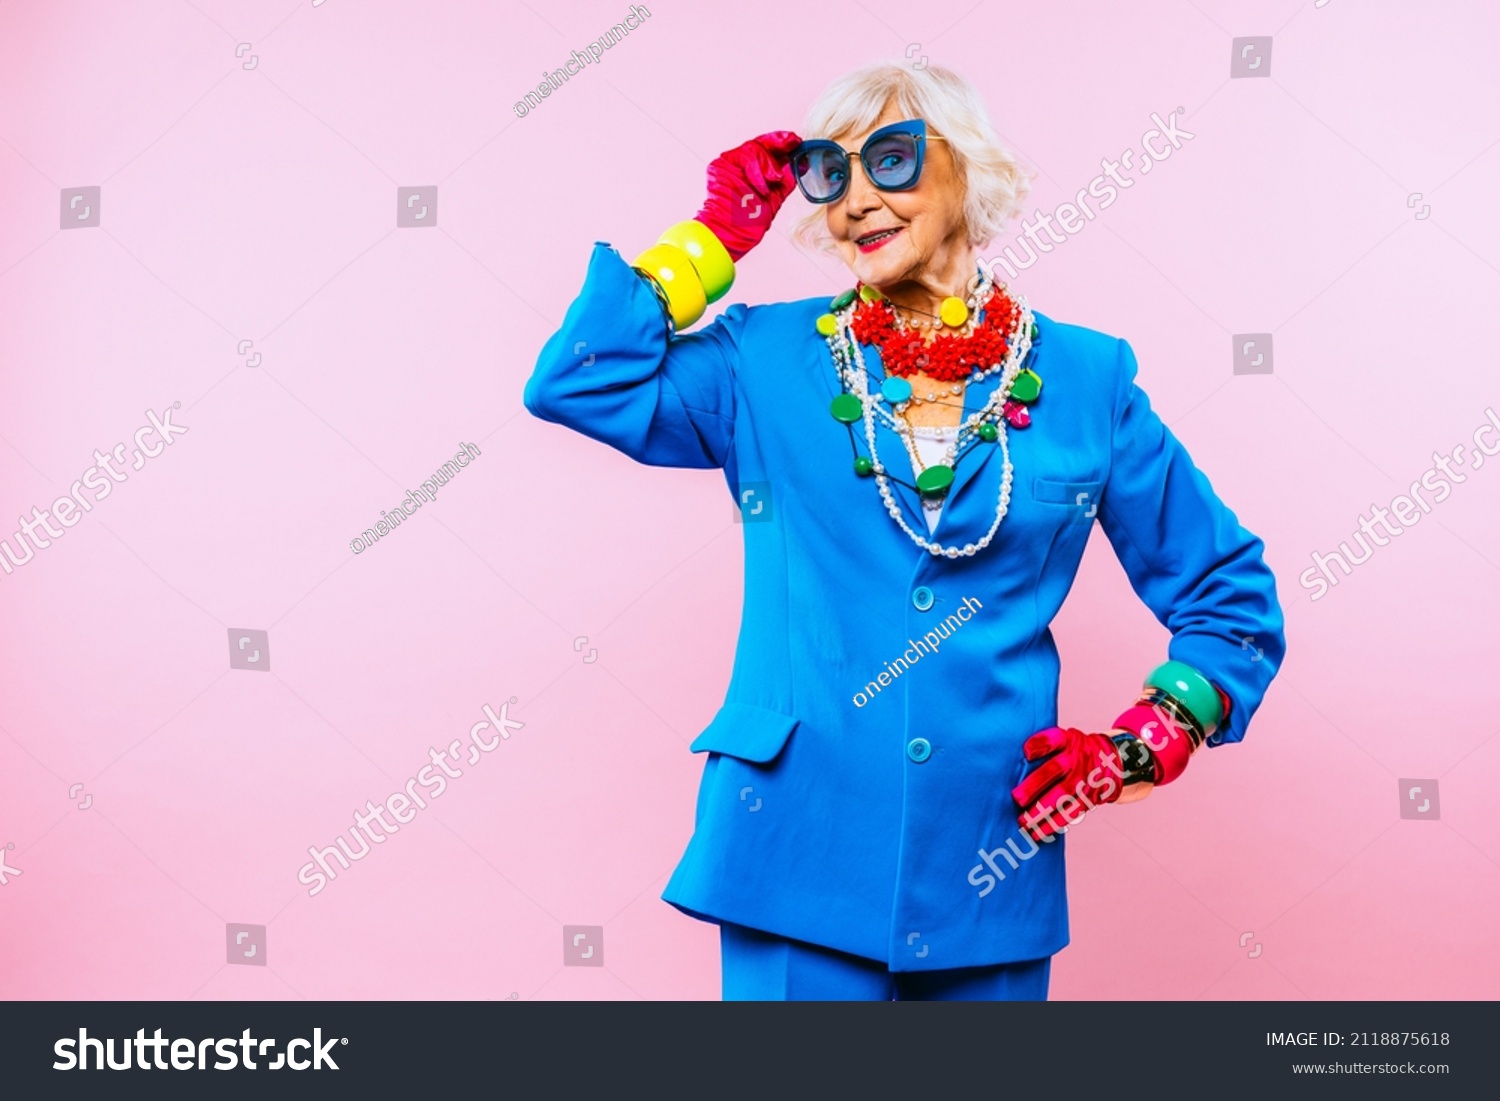 Happy and funny cool old lady with fashionable clothes portrait on colored background - Youthful grandmother with extravagant style, concepts about lifestyle, seniority and elderly people #2118875618